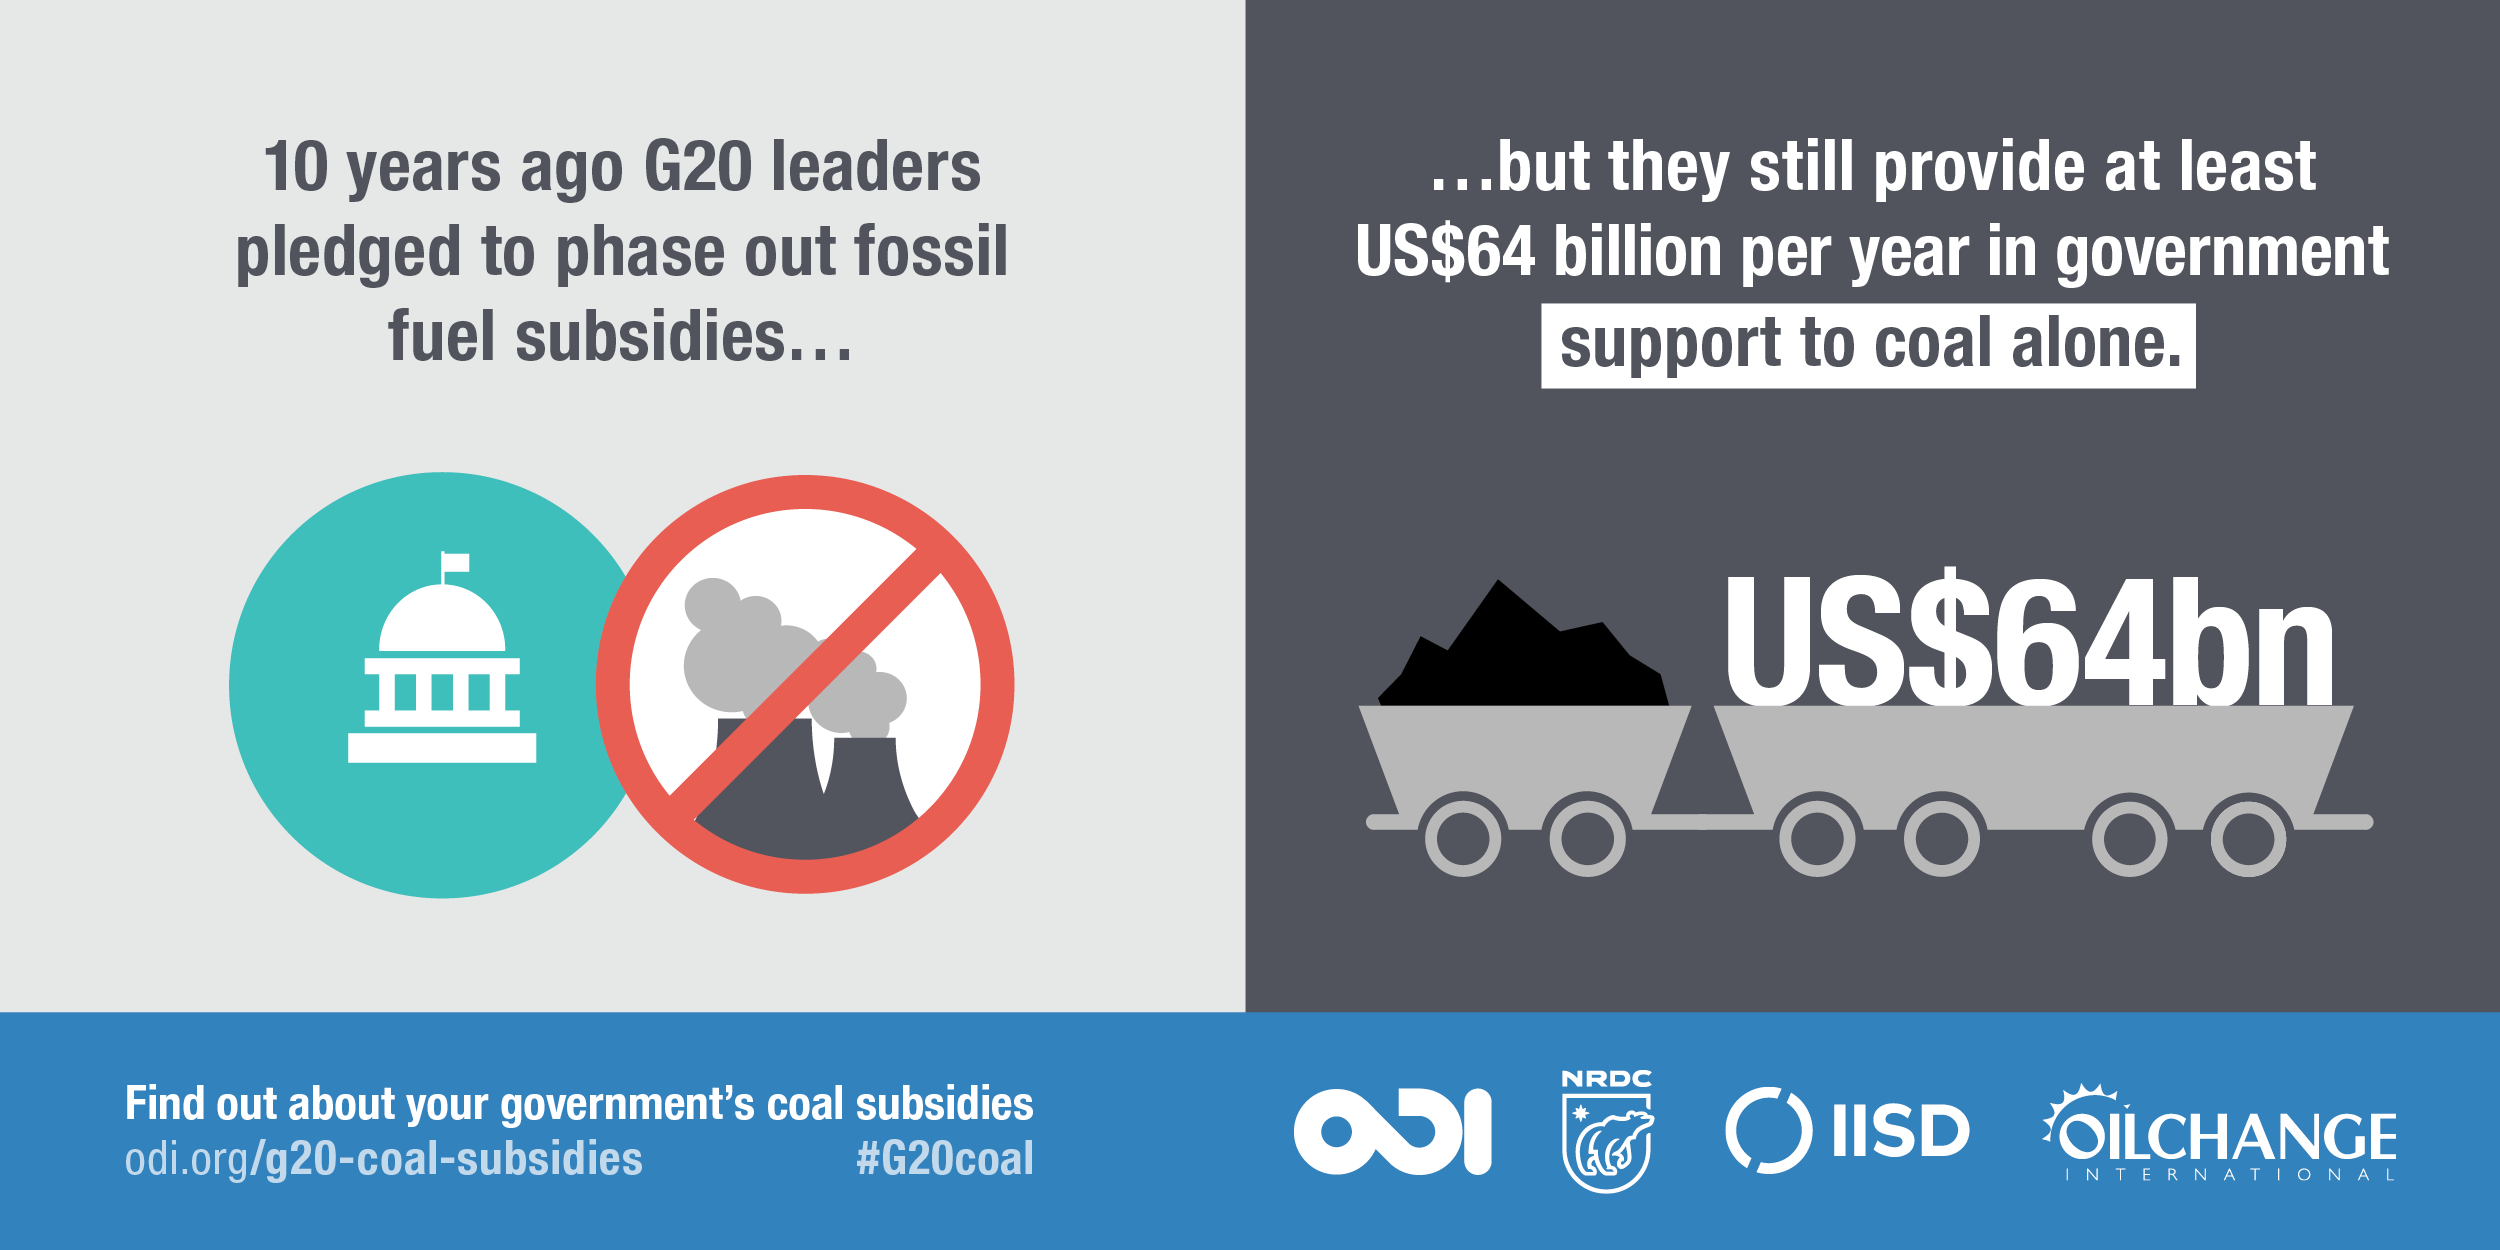 10 years ago G20 leaders pledged to phase fossil fuel subsidies... but they still provide at least US$64 billion per year in government support to coal alone. Image: ODI